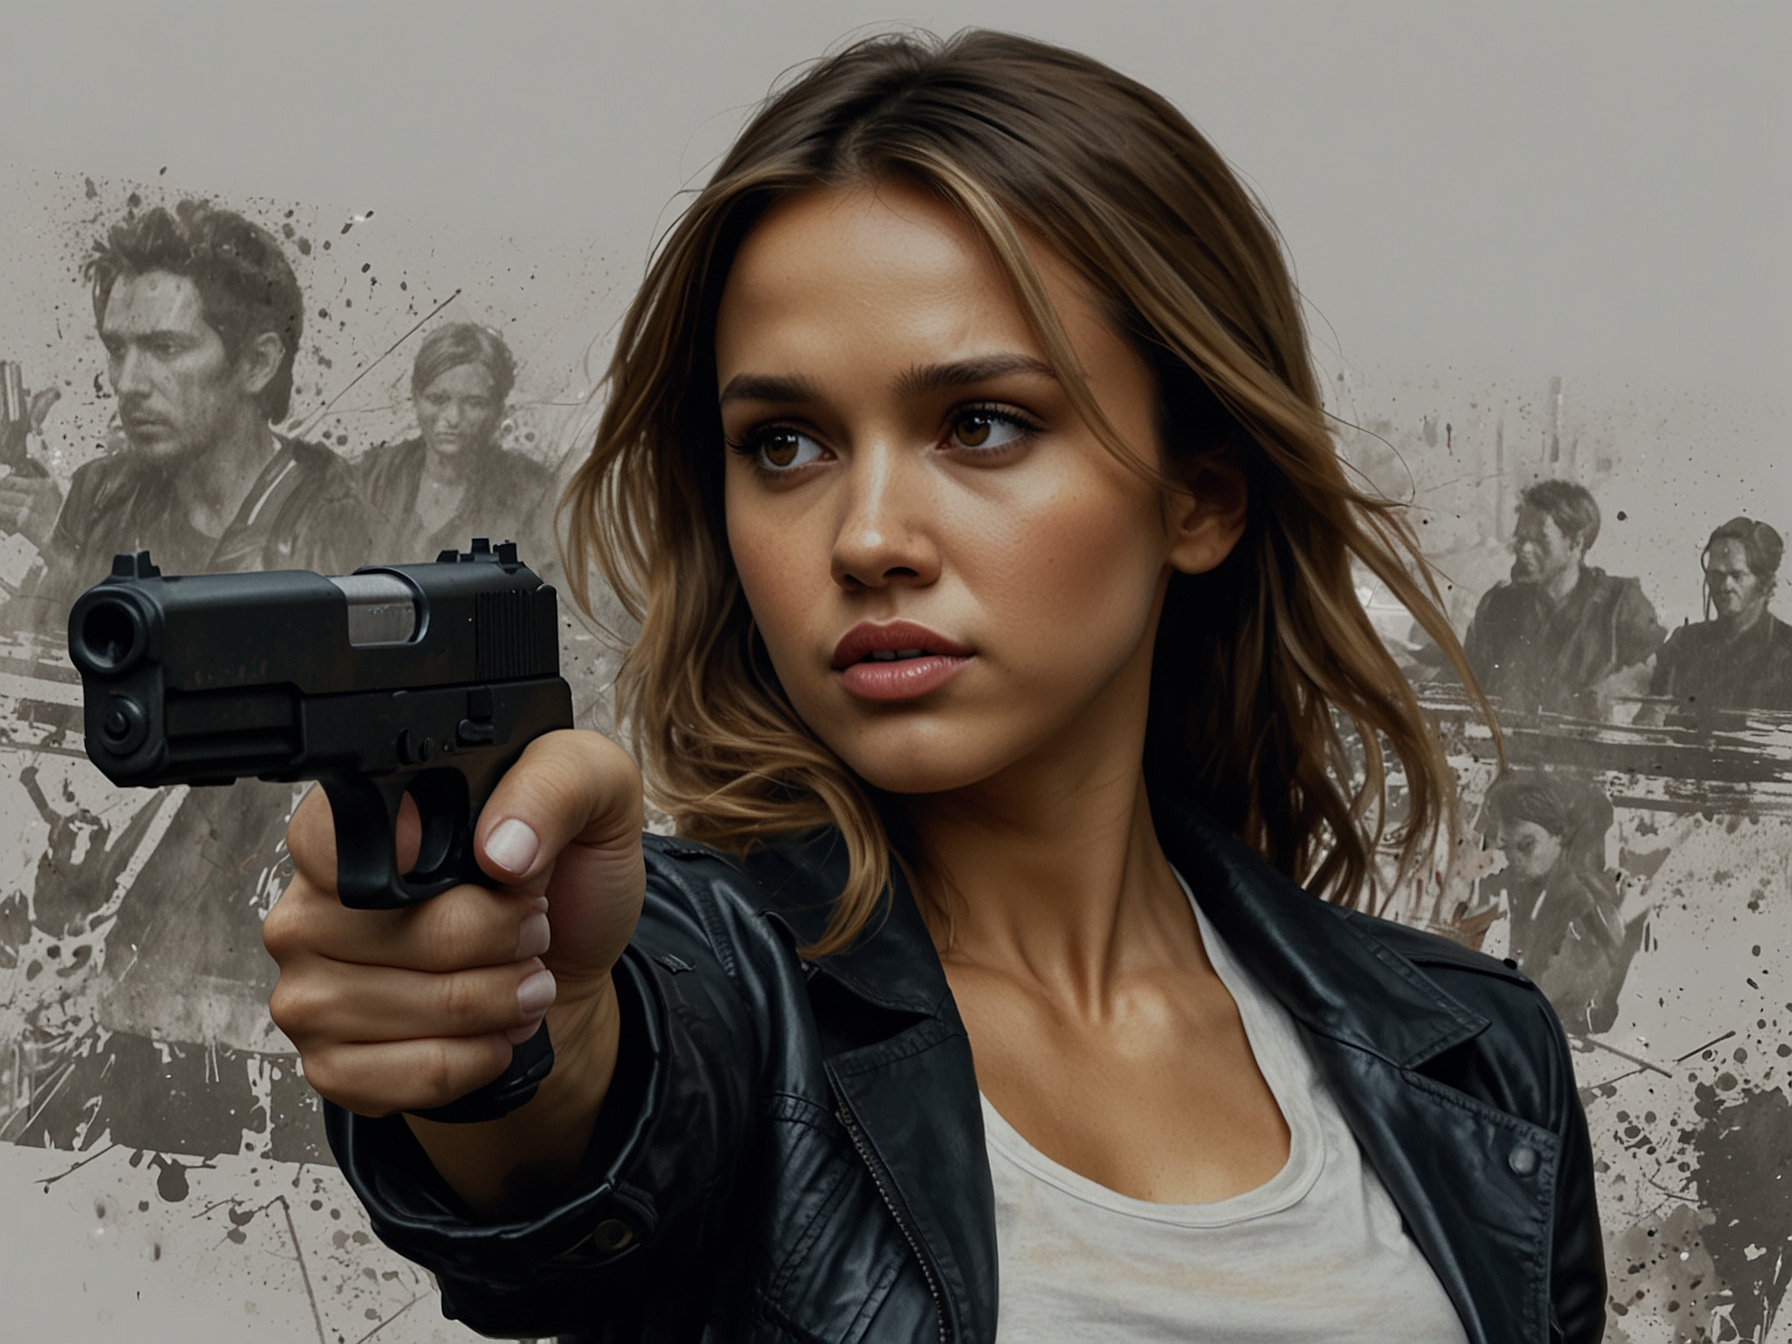 An image of Jessica Alba in a dynamic action scene from the new Netflix movie, capturing the intensity and thrill that drew viewers despite the film's poor critical reception.